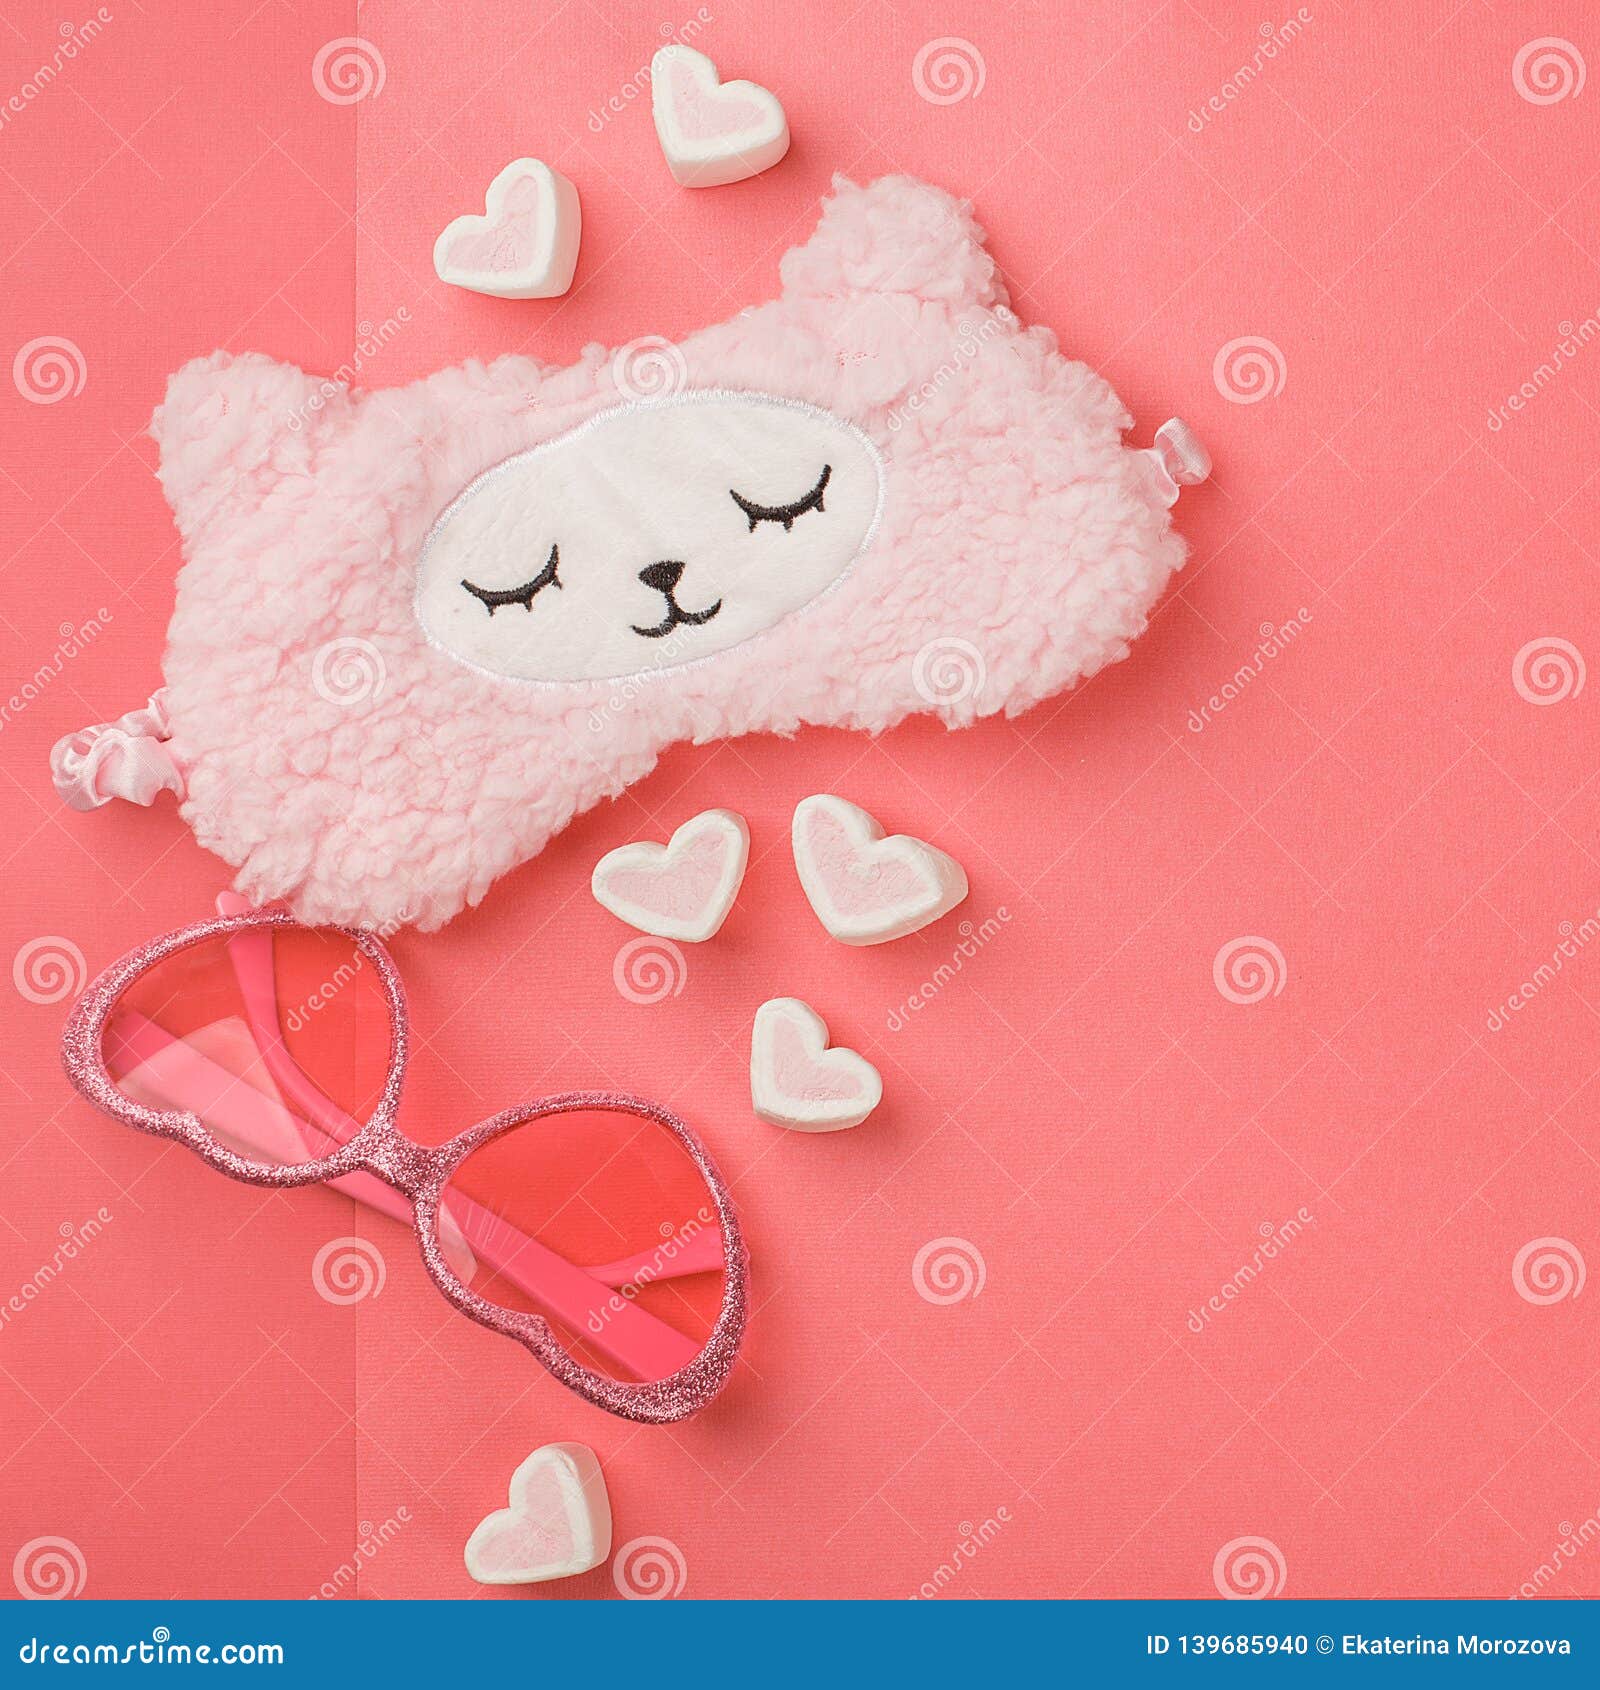 Set of Feminine Accessories with Sunglasses, Sleep Band and Heart-shaped  Marshmallow Sweetness on Living Coral Pink Background Stock Photo - Image  of girl, collage: 139685940